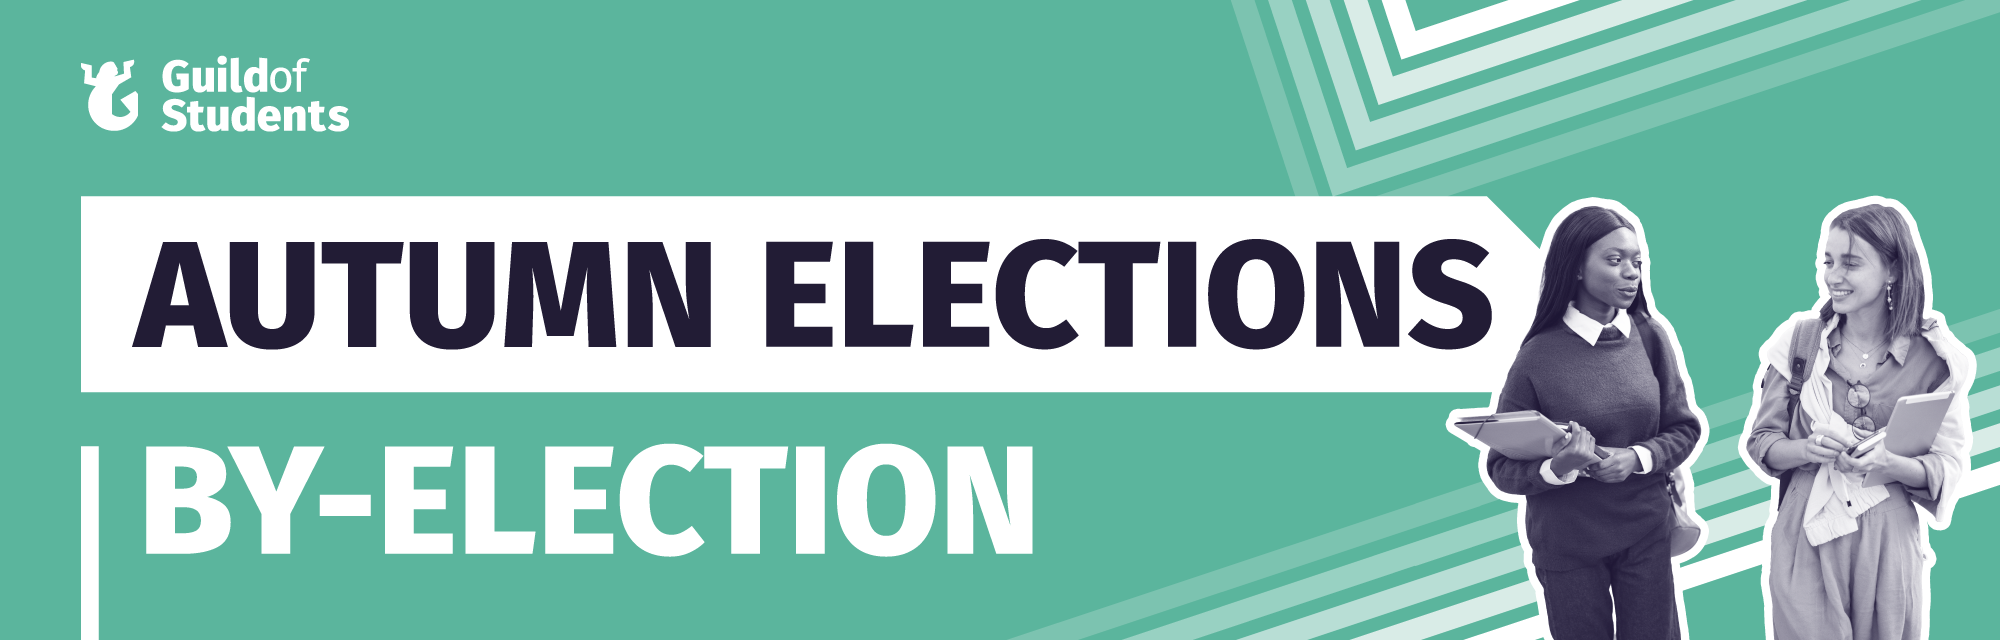 Autumn Elections By-election